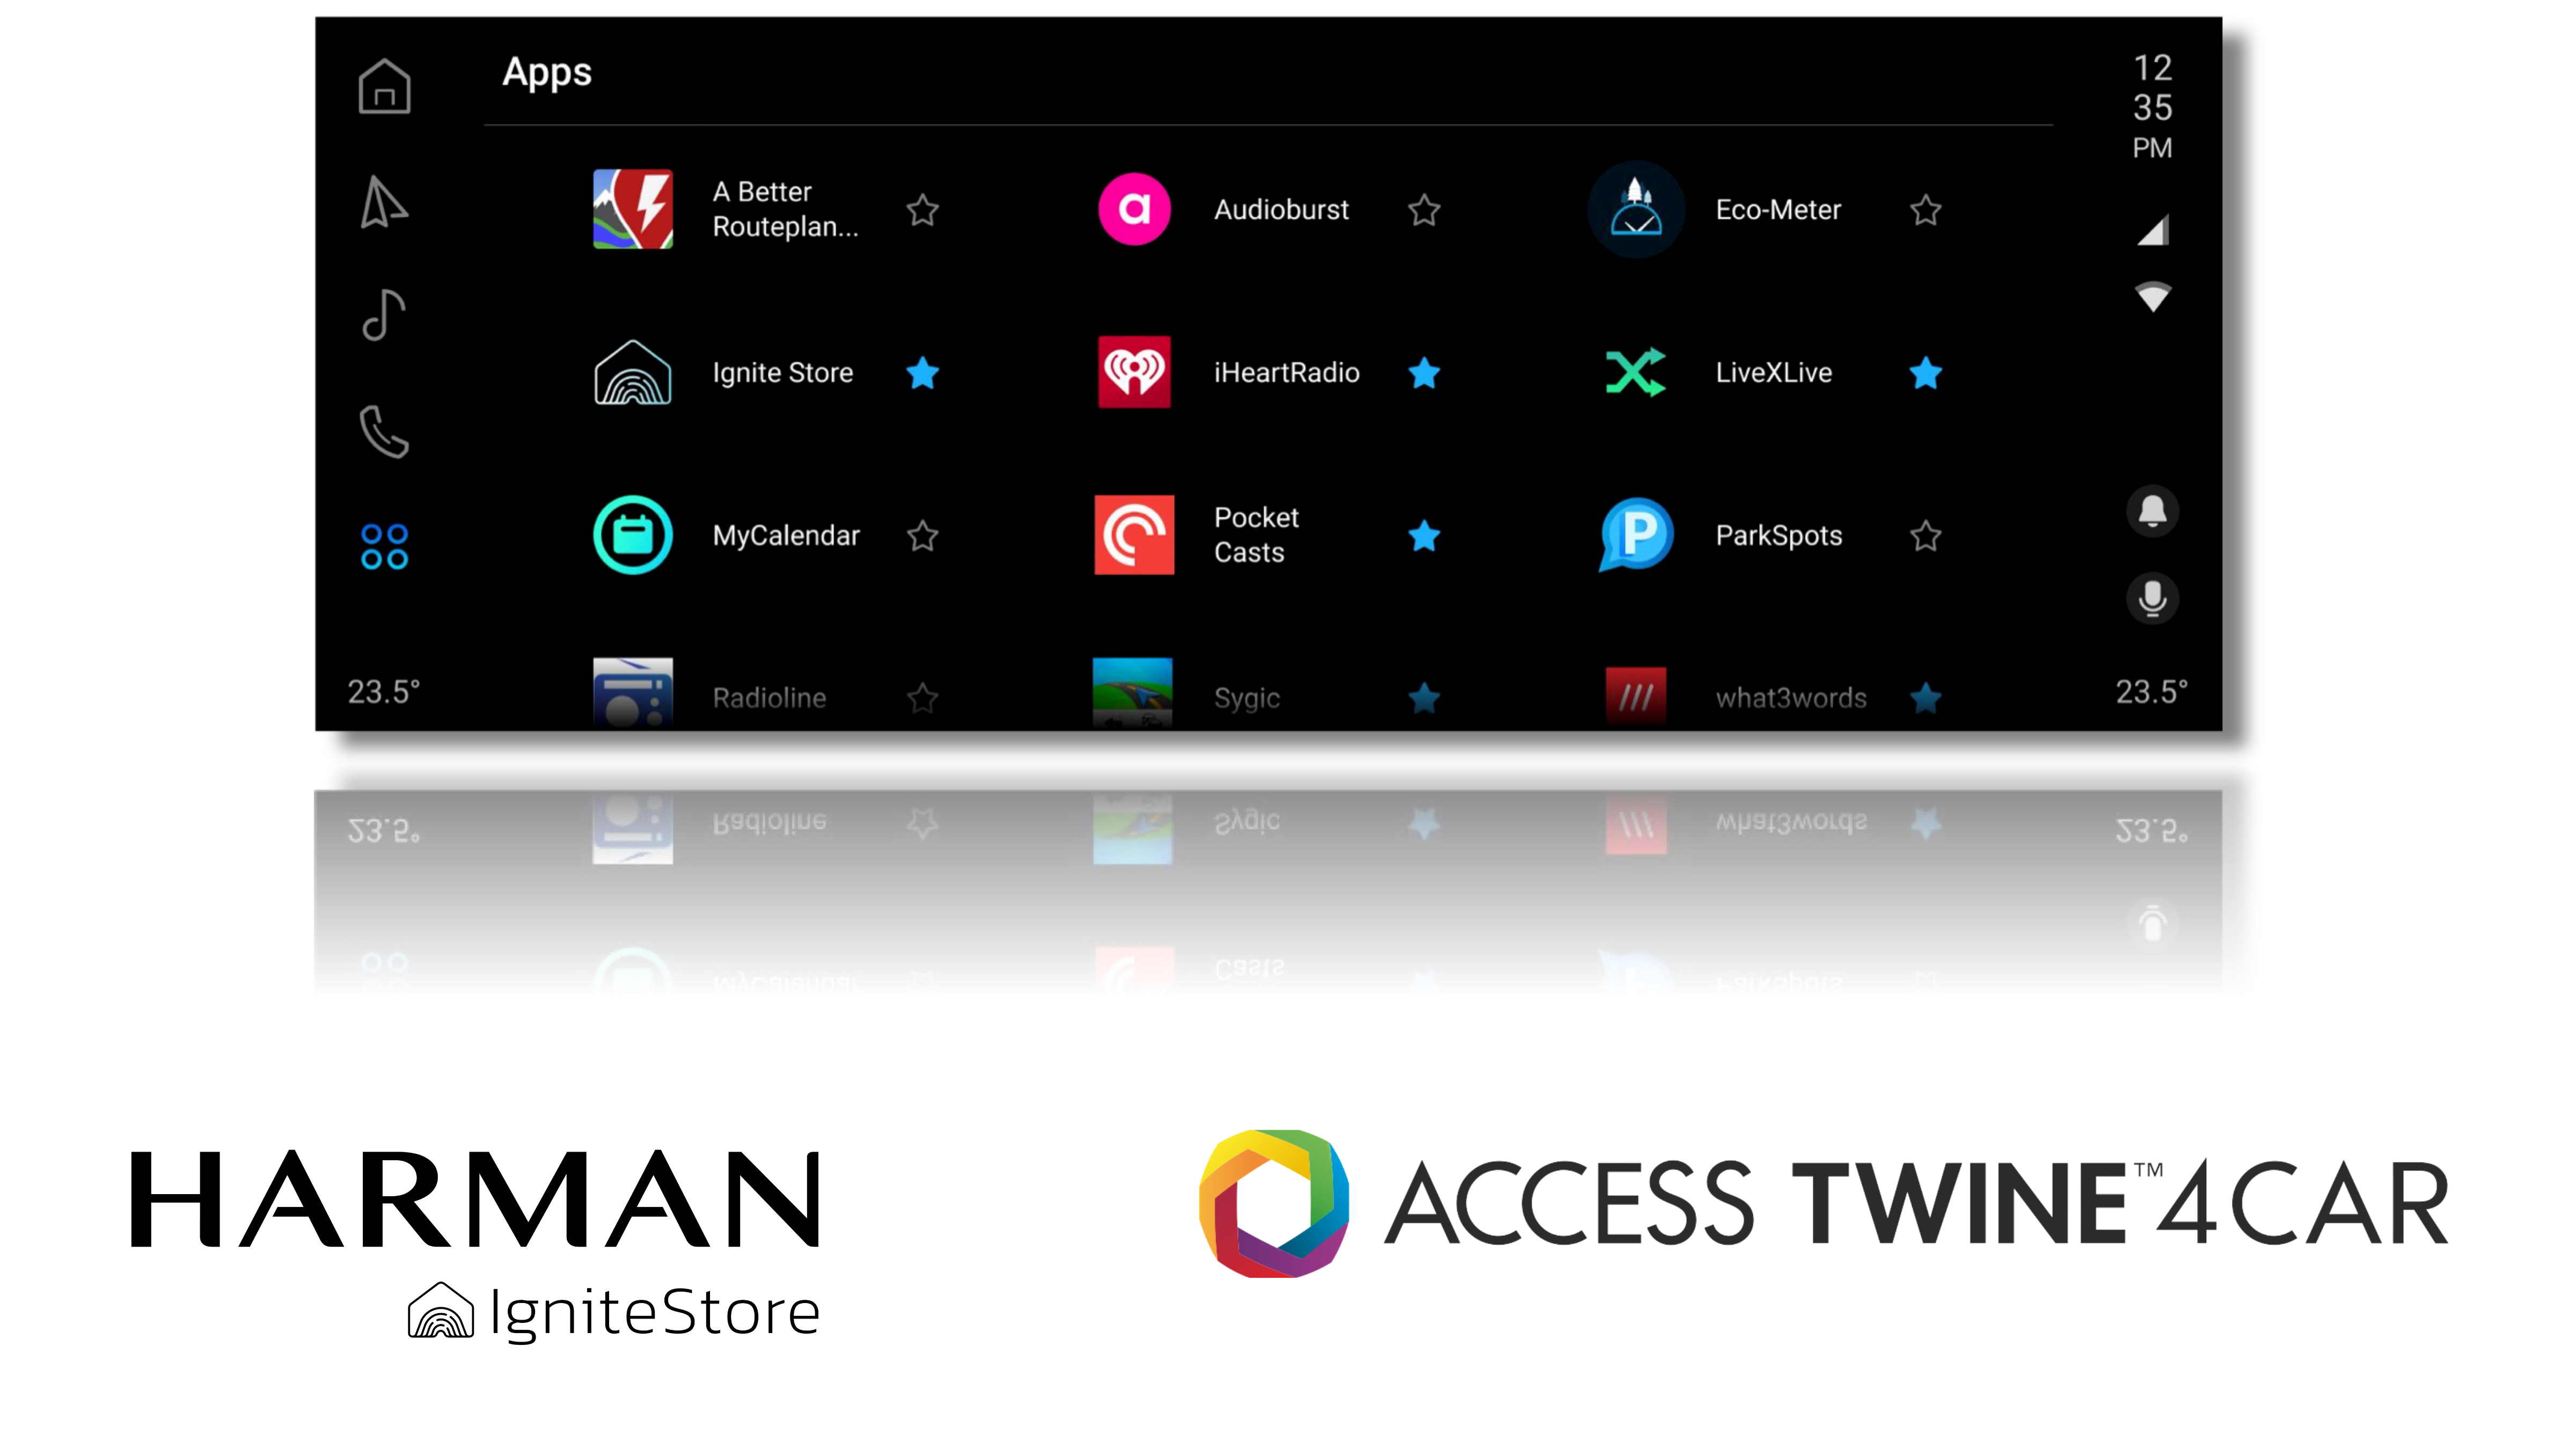 ACCESS Twine™ for Car platform now integrated with the HARMAN Ignite Store